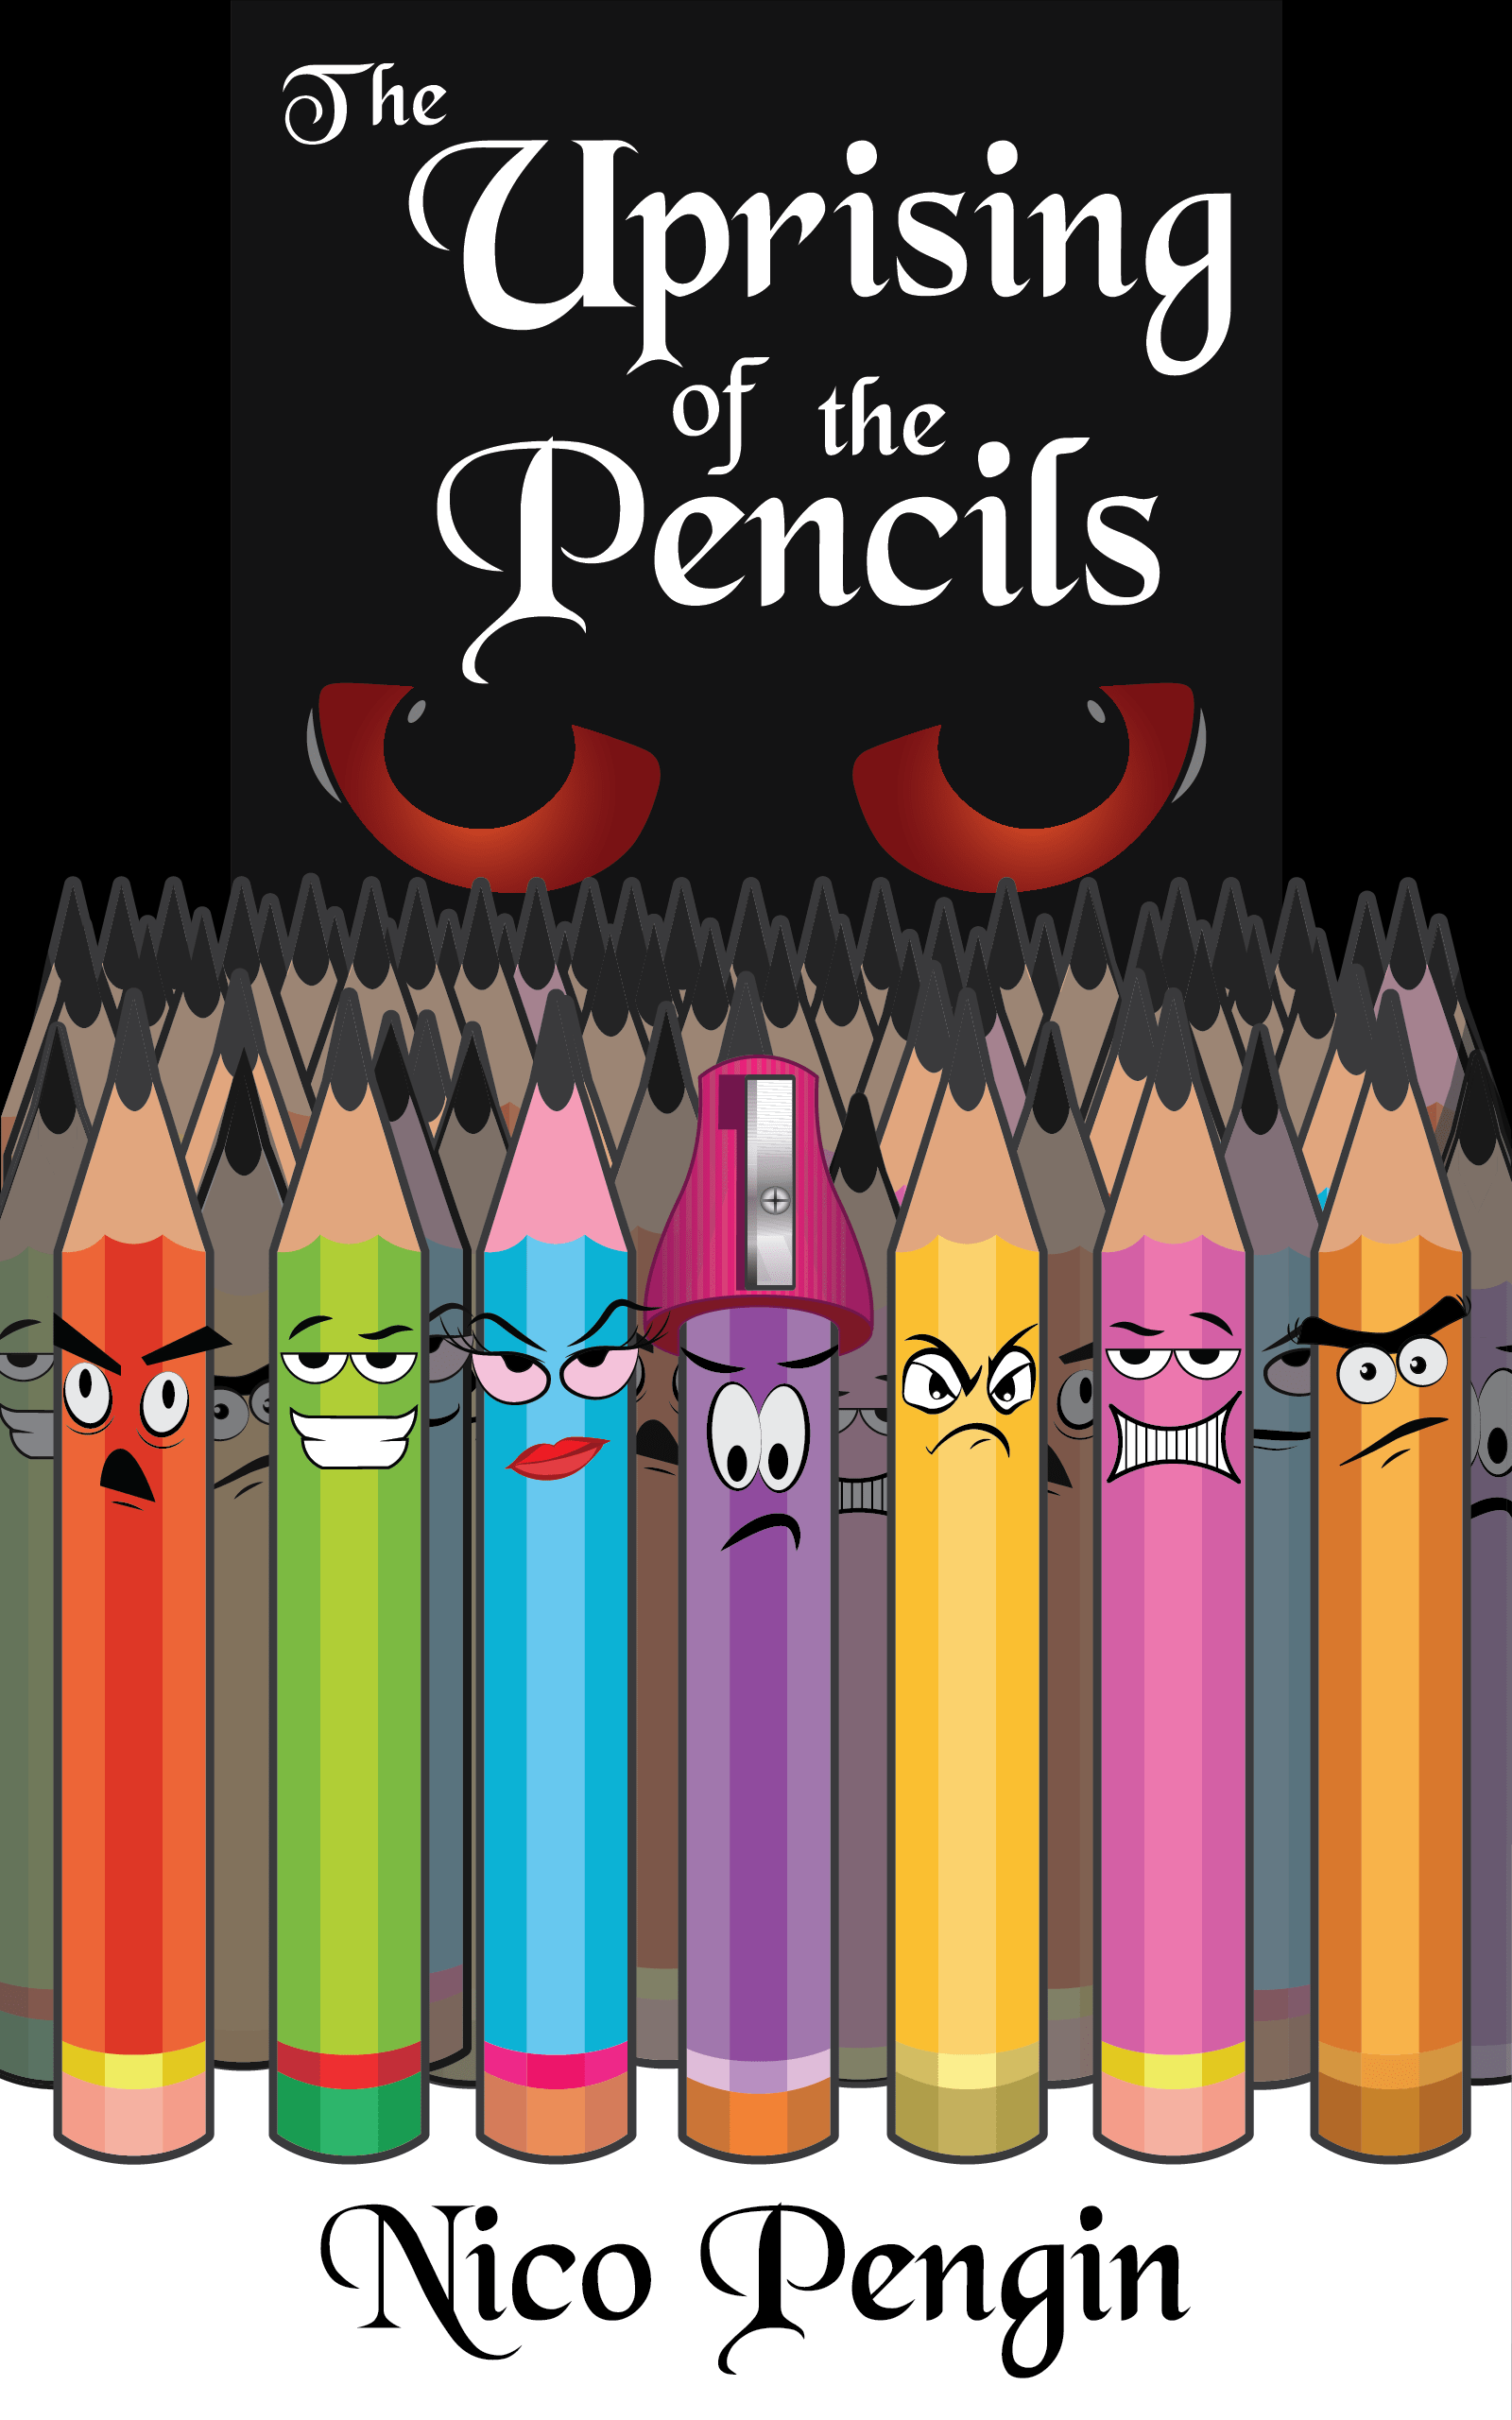 You are currently viewing A bright future for The uprising of the pencils